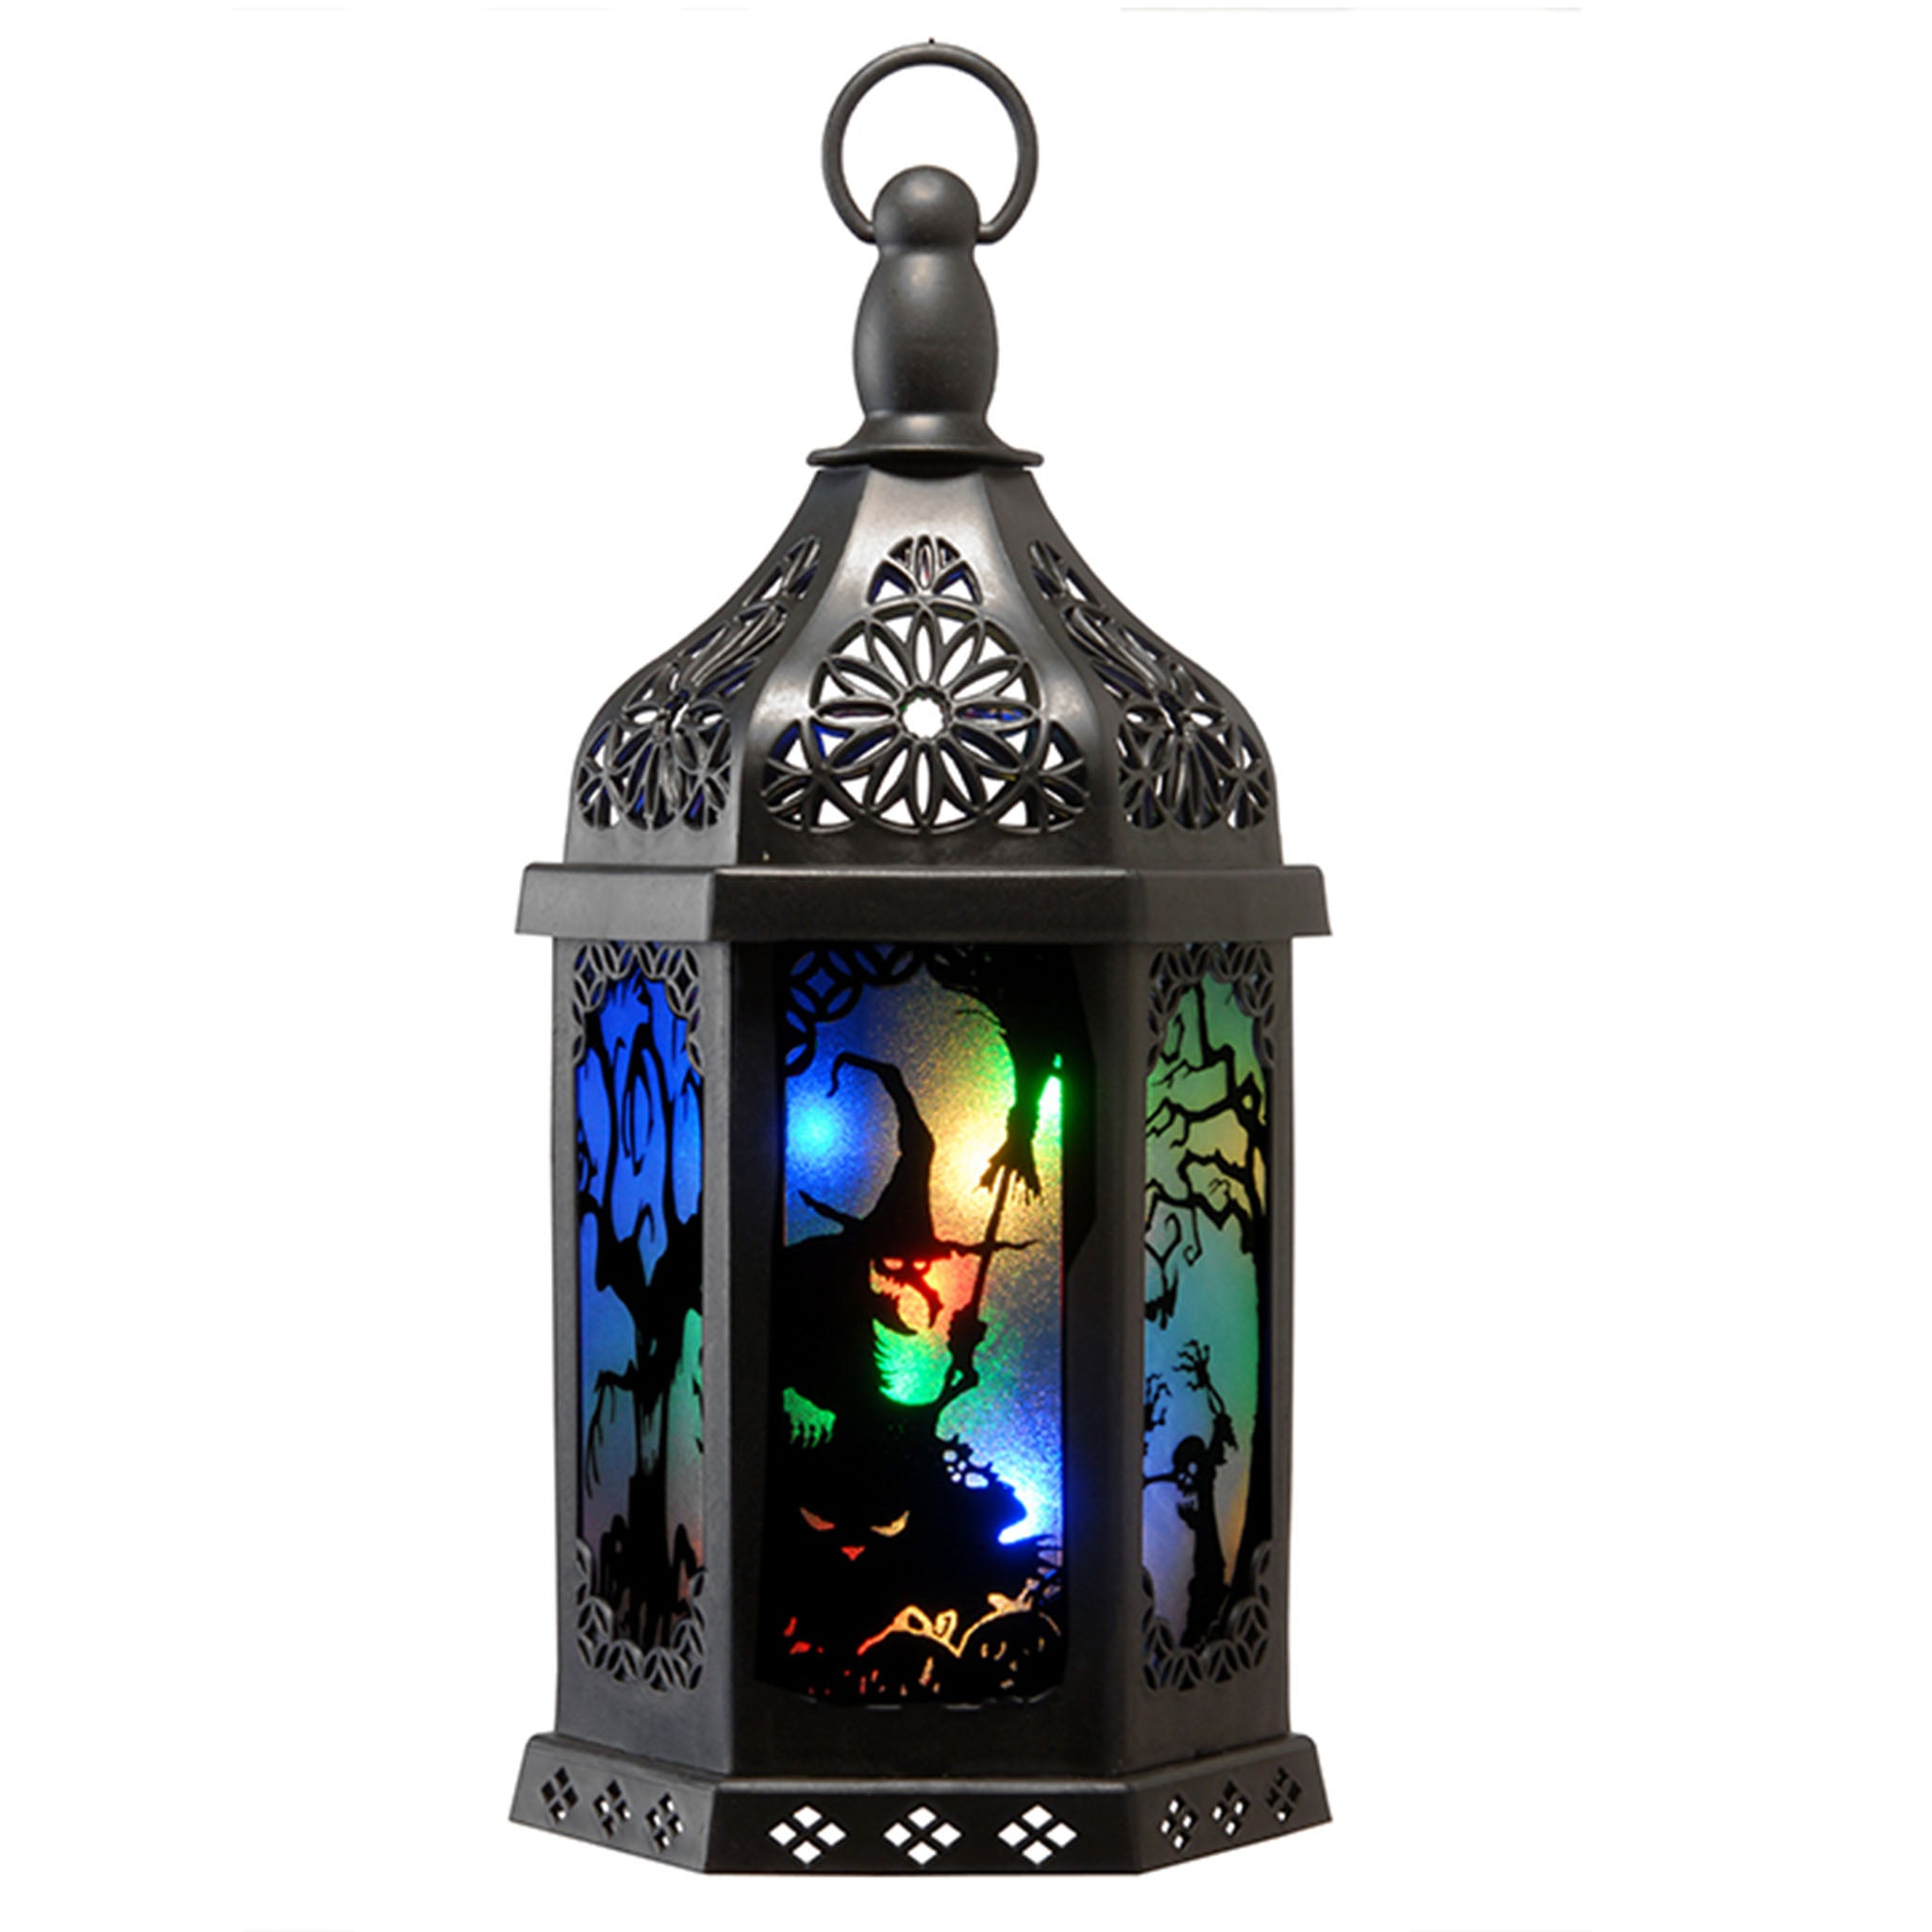 Halloween Lantern with LED Lights, Carved Images, 15 inches